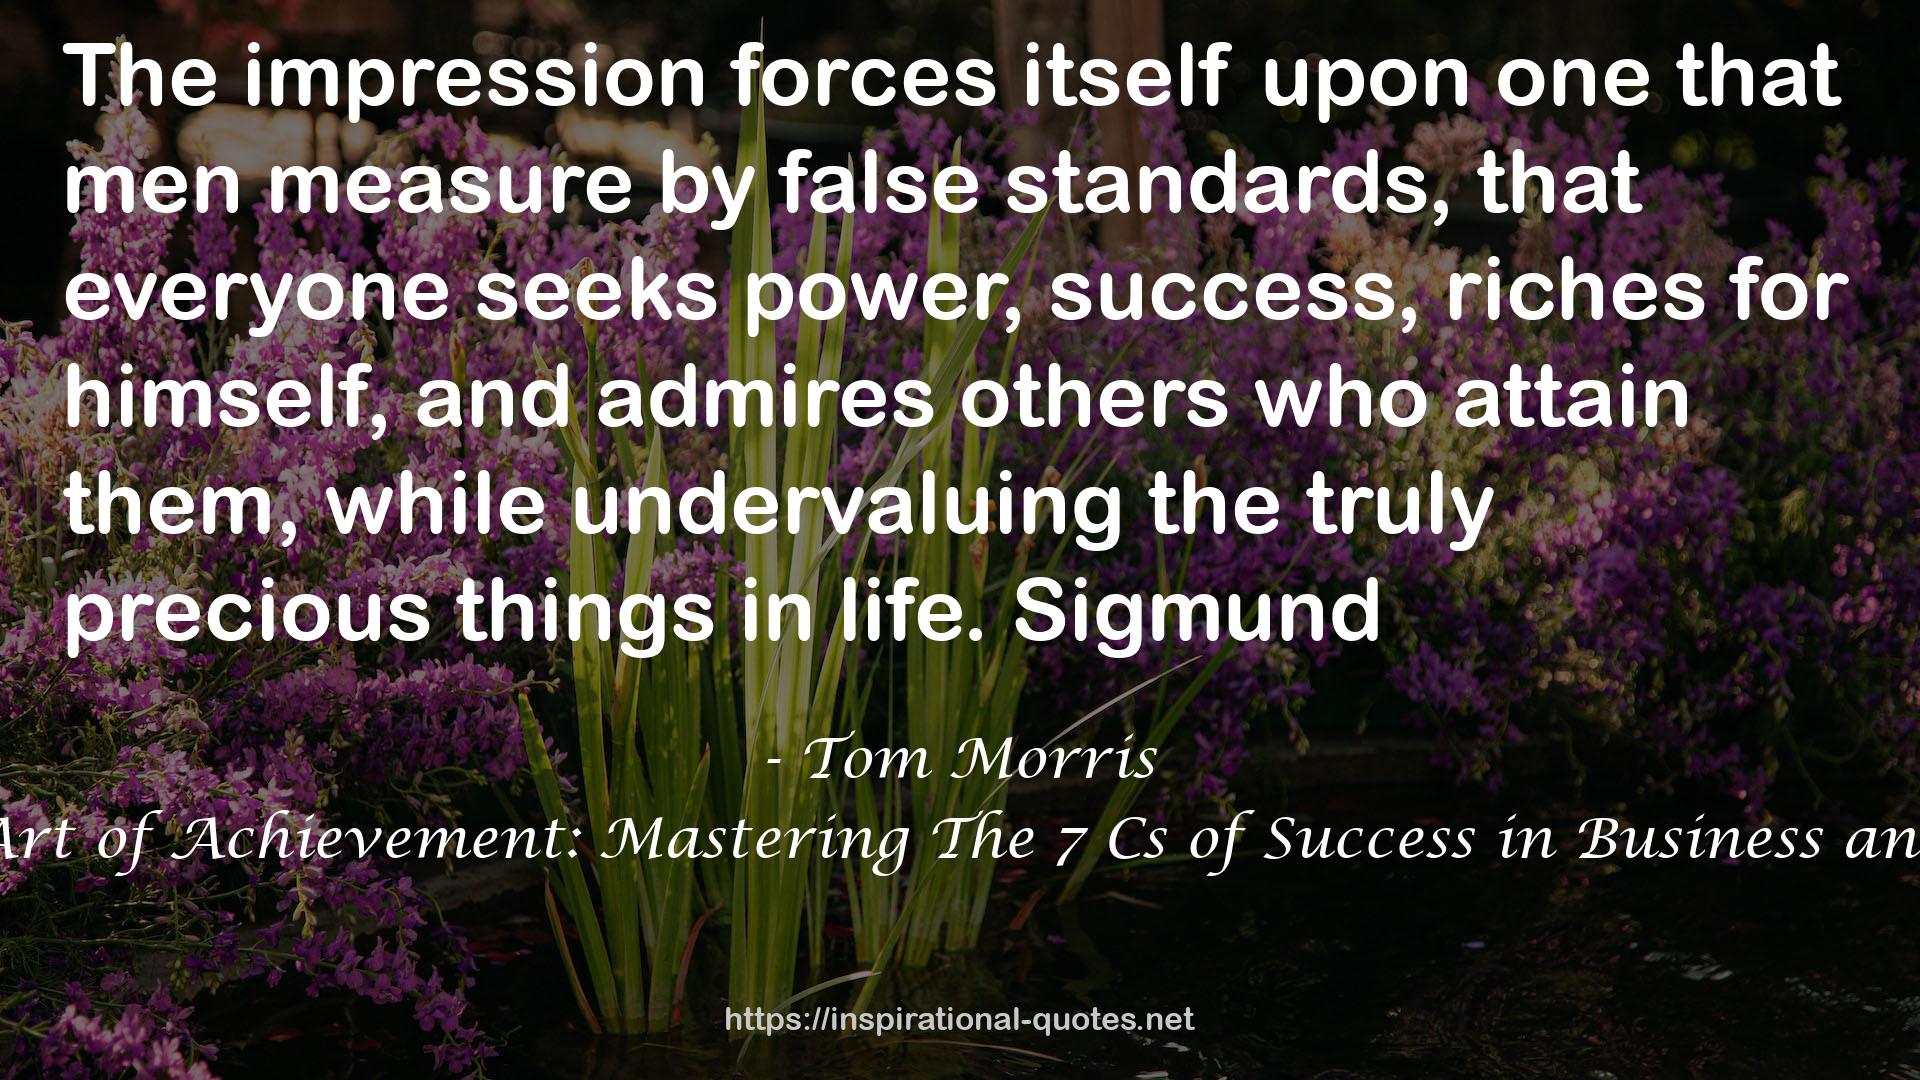 The Art of Achievement: Mastering The 7 Cs of Success in Business and Life QUOTES